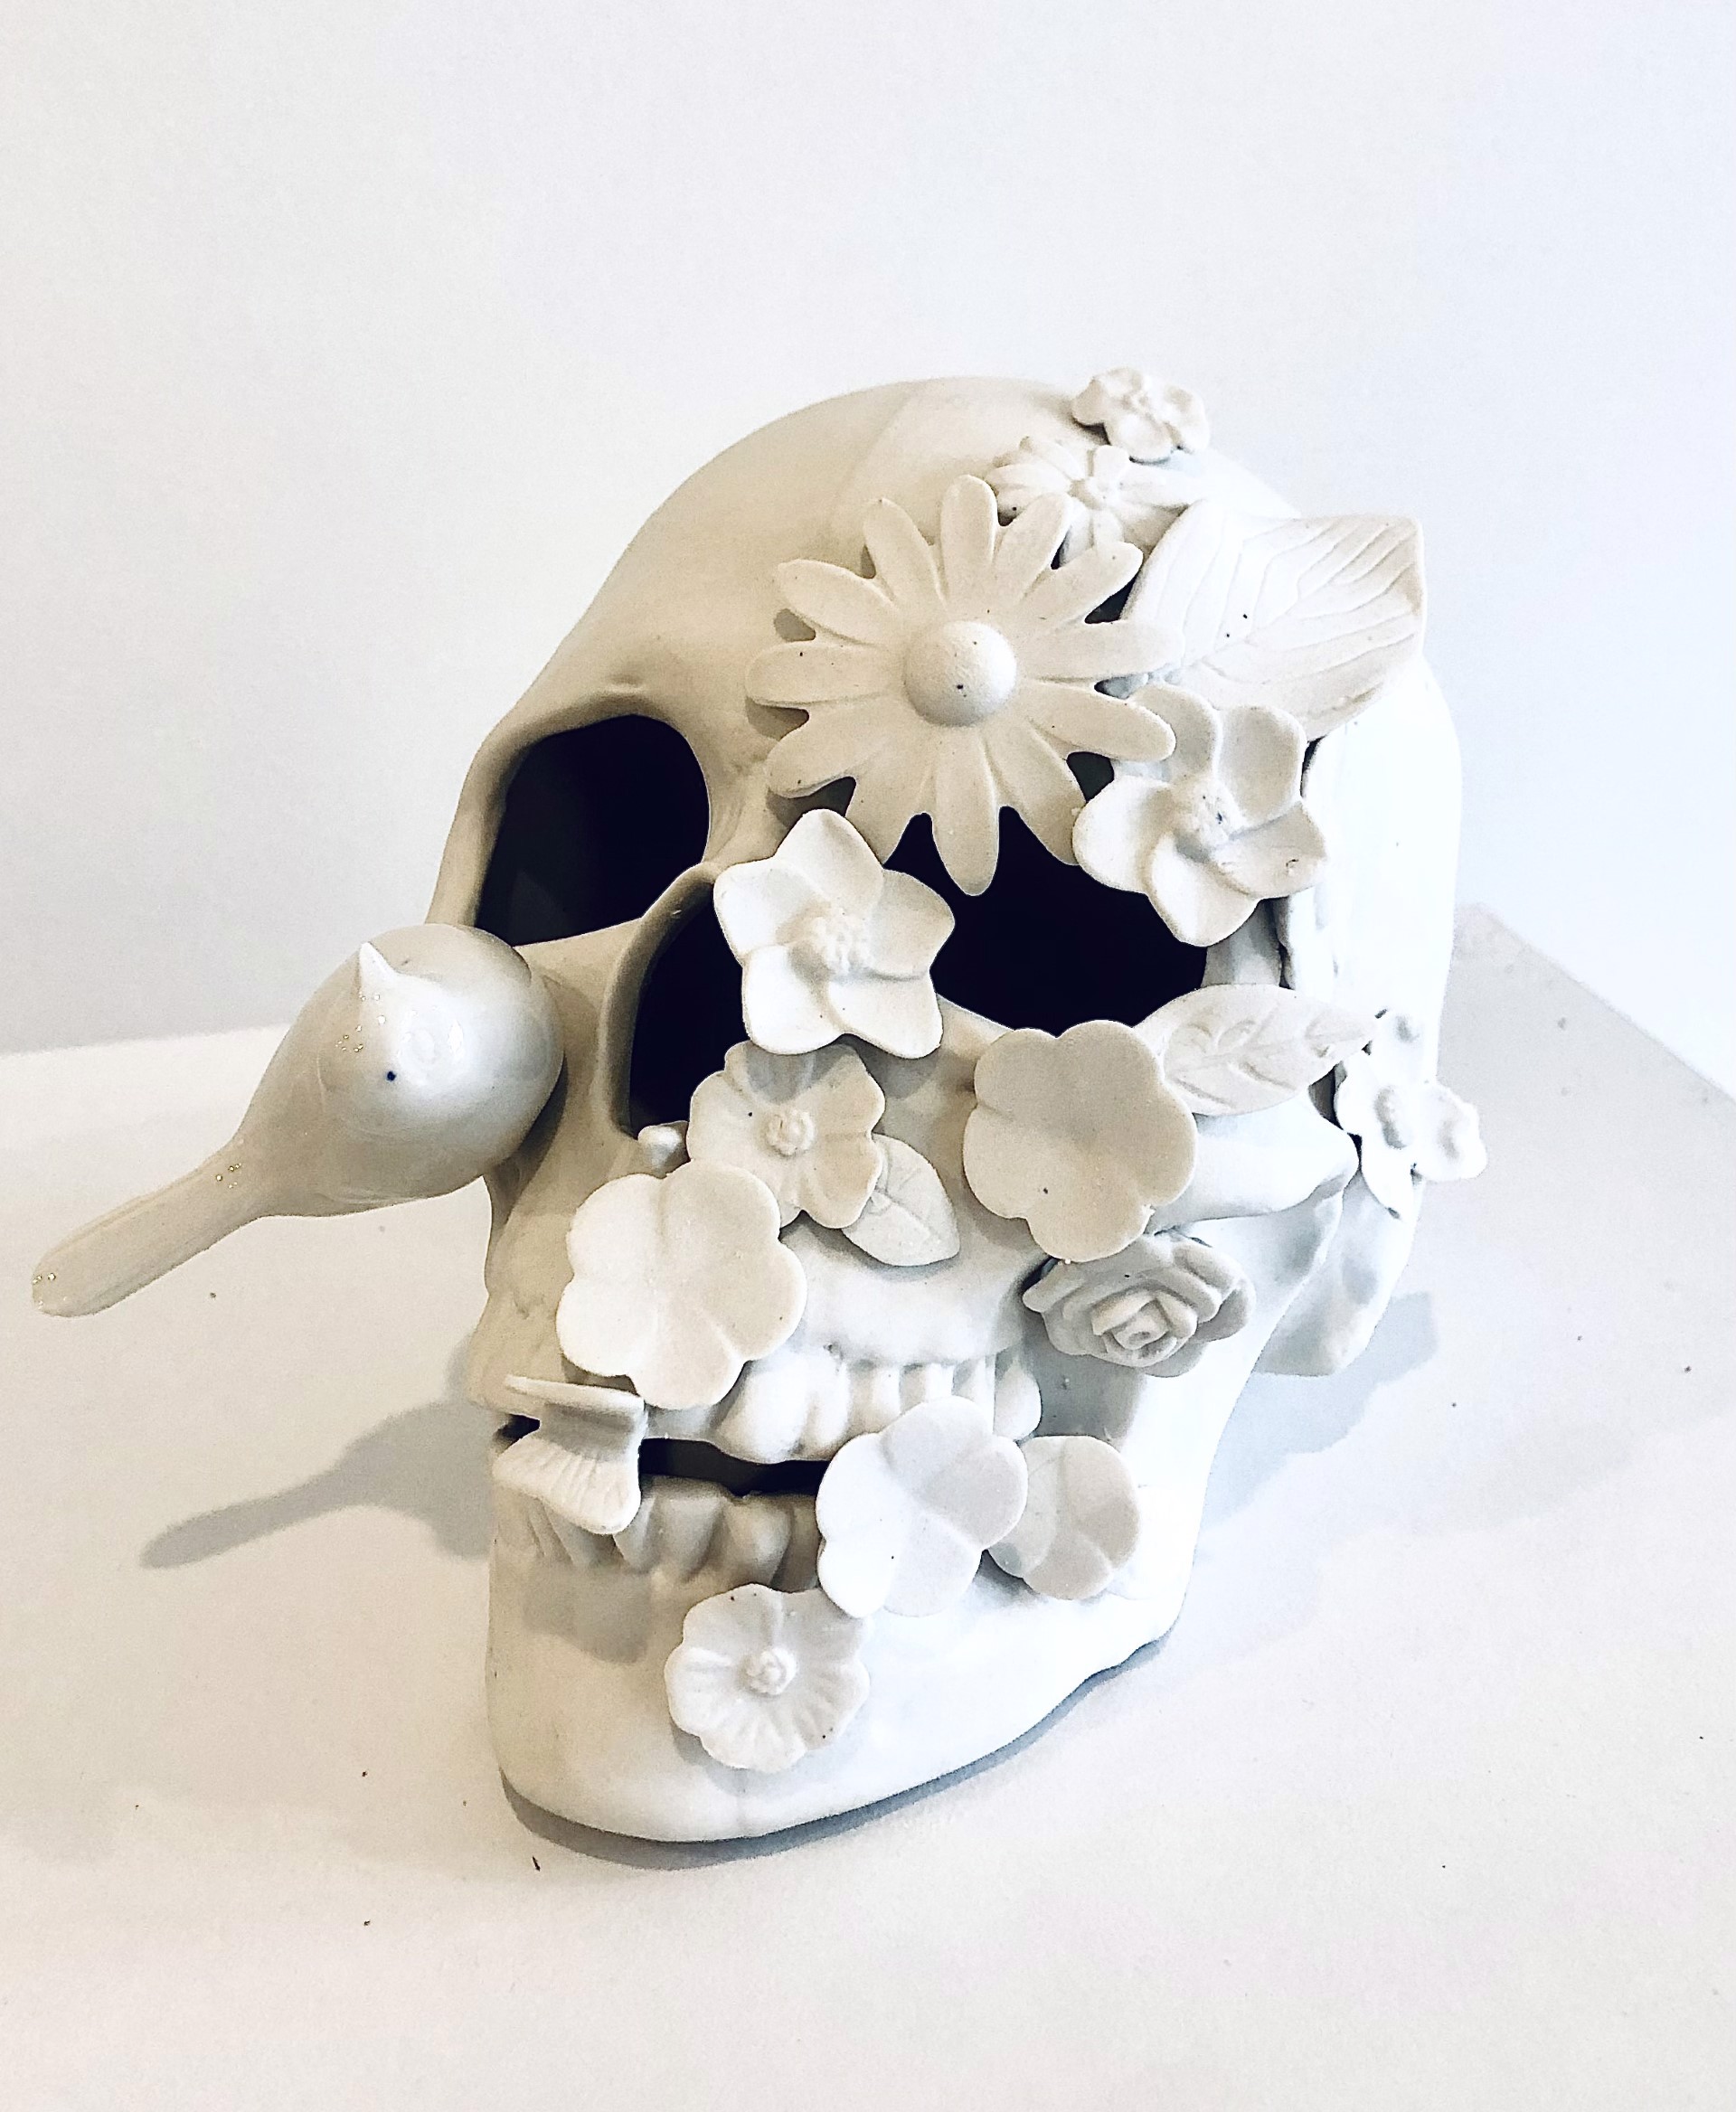 Skull with Bird and Flowers by Jeff Herrity